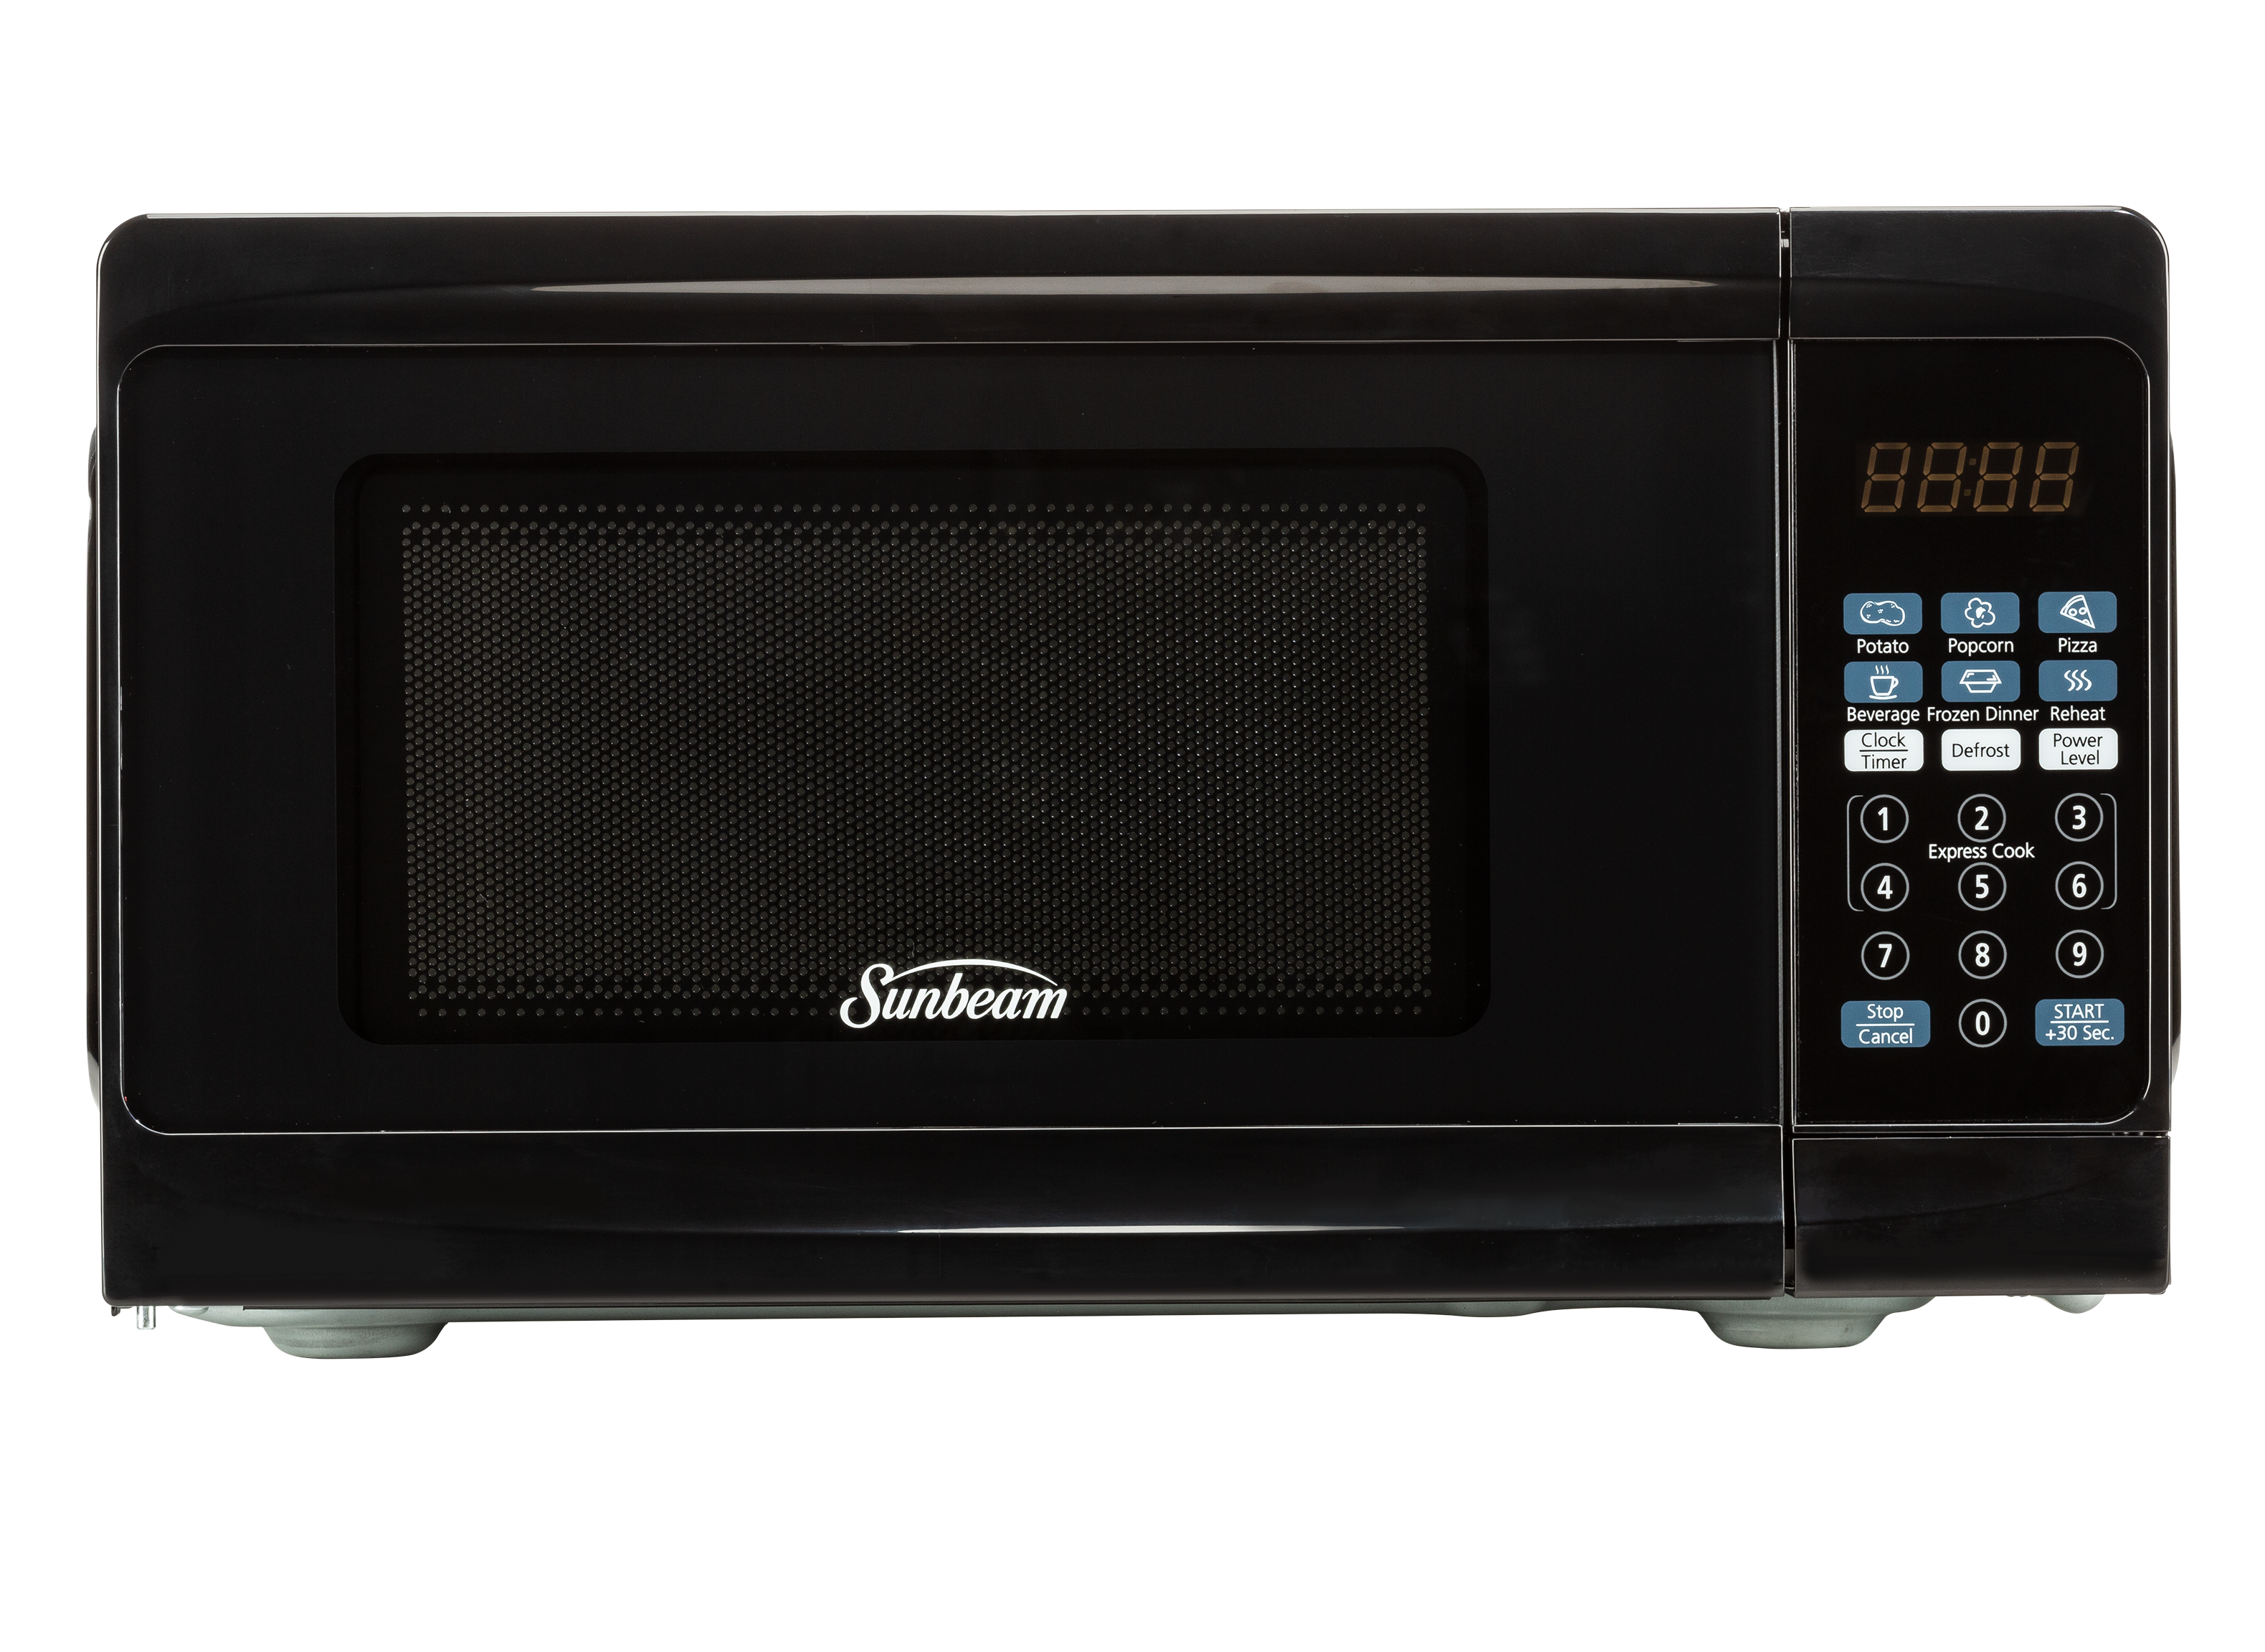 https://crdms.images.consumerreports.org/prod/products/cr/models/405093-small-countertop-microwaves-sunbeam-sgcmv807bk-07-10026448.png